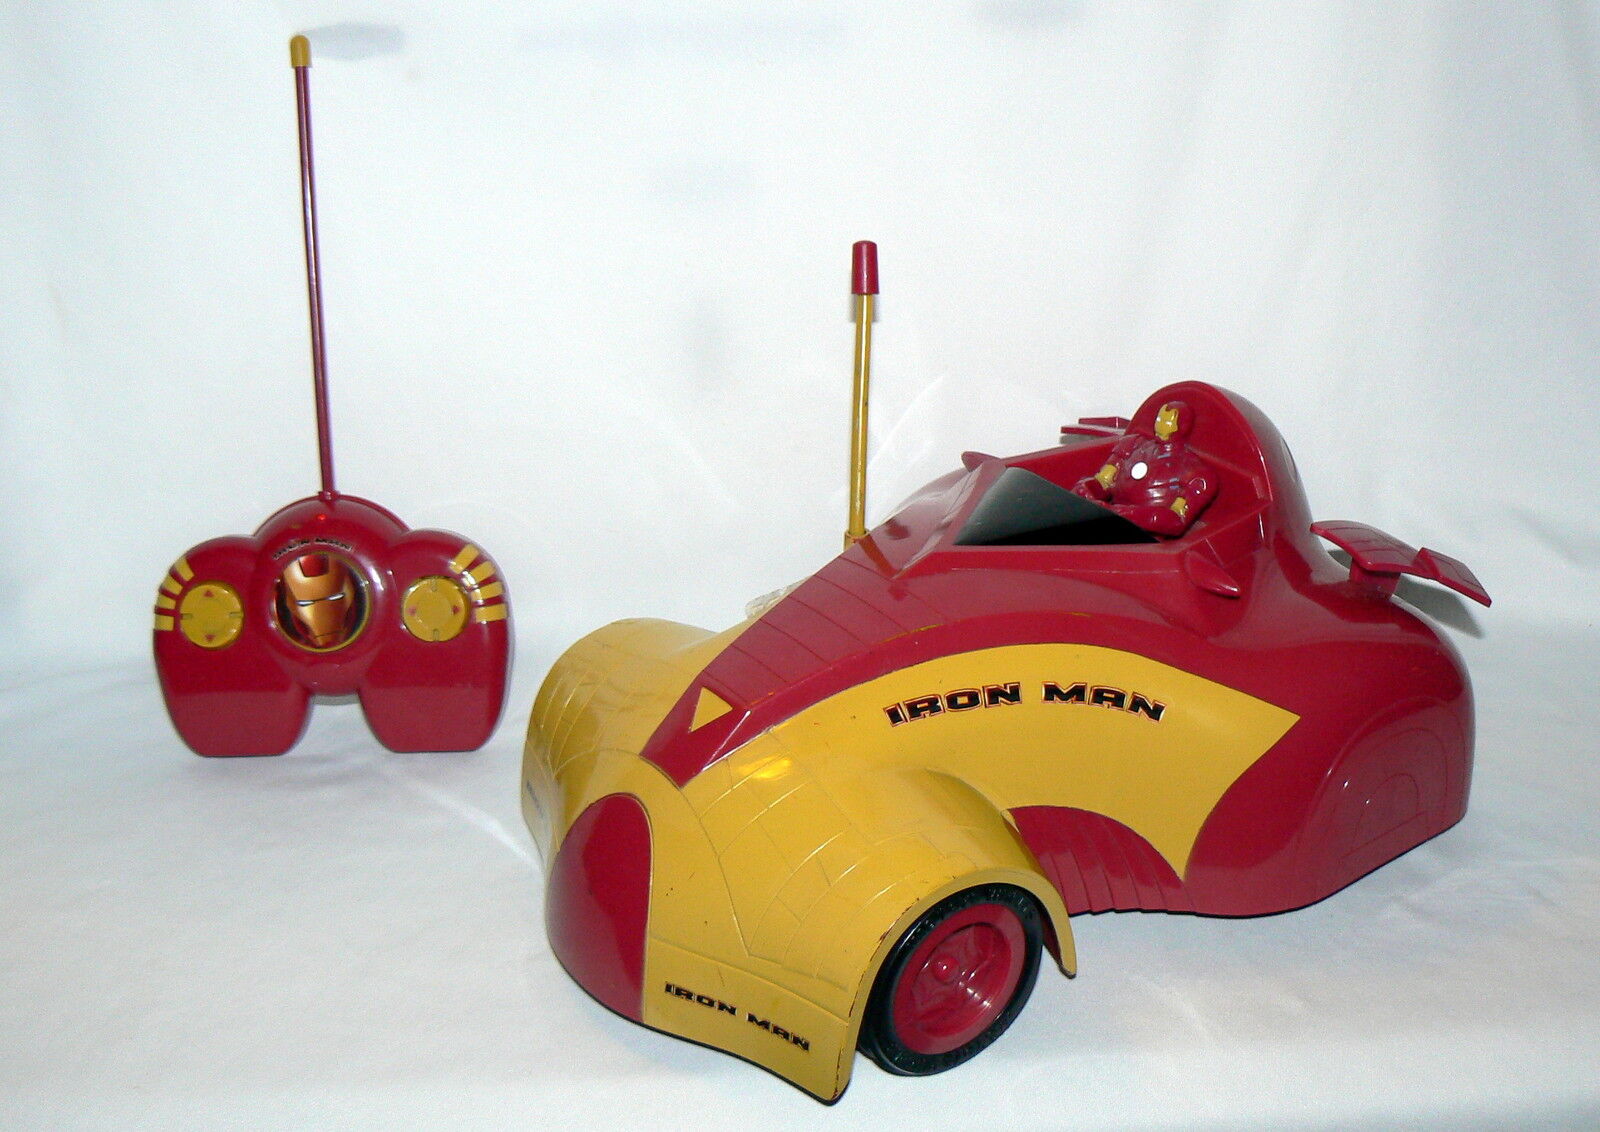 IMC TOYS IRON MAN RC CAR 40 MHZ VEHICLE WITH REMOTE CONTROL 12 1/2" 